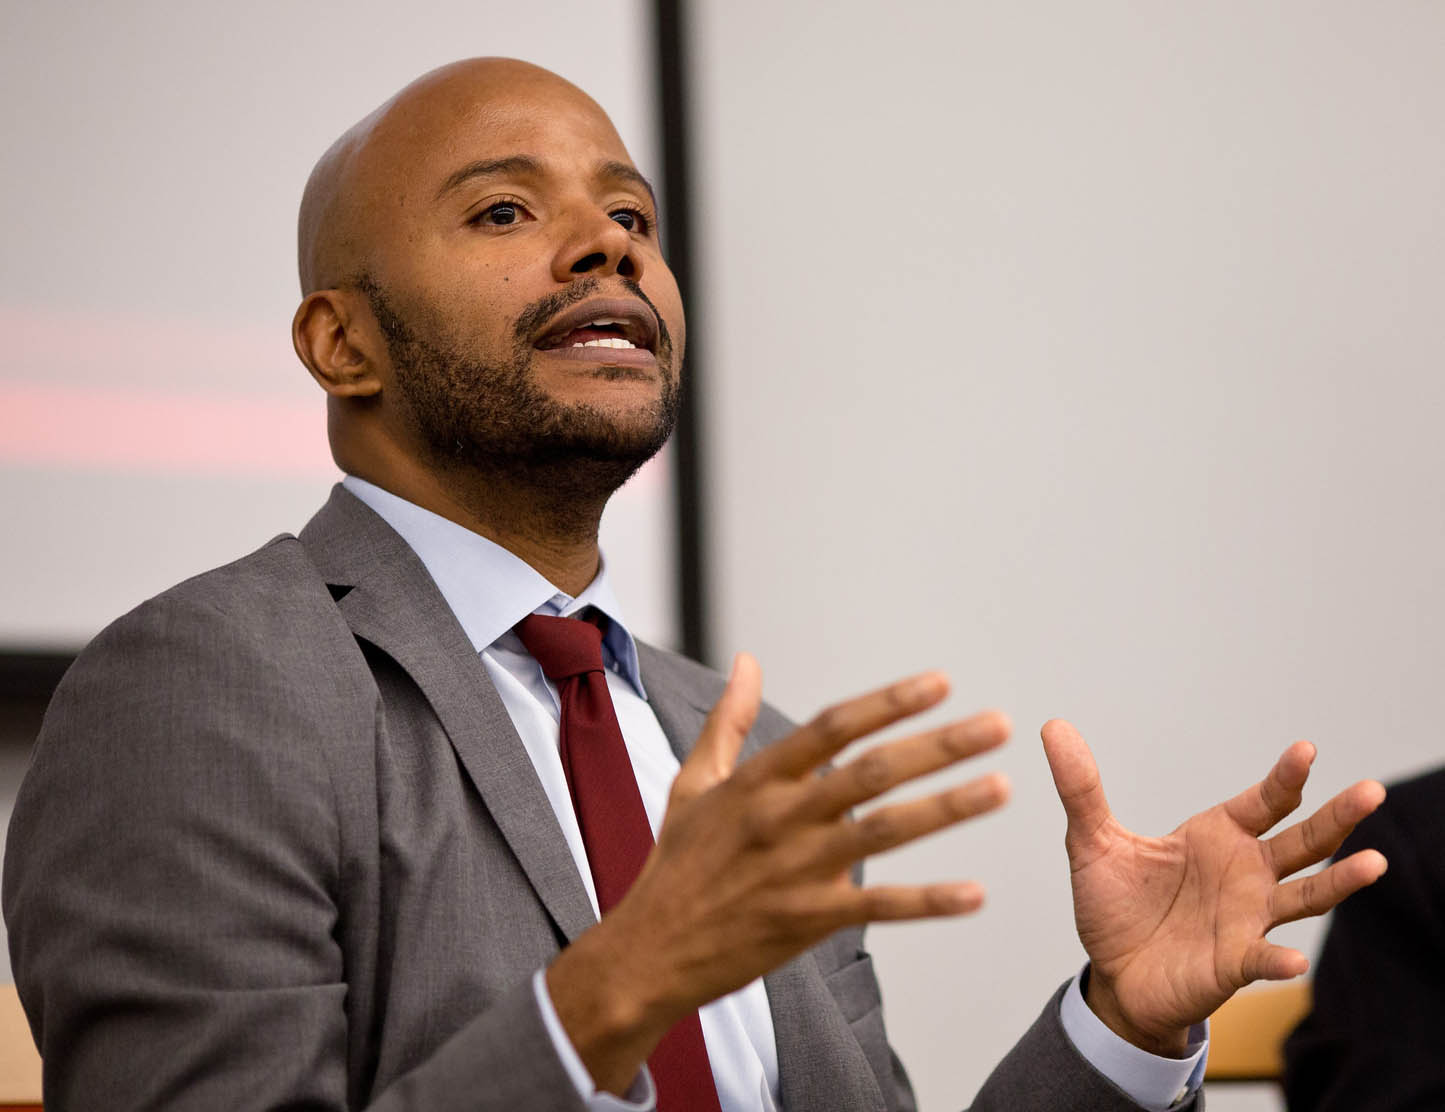 The LBJ School's Dr. Peniel Joseph during the Kerner Commission event on March 5, 2018